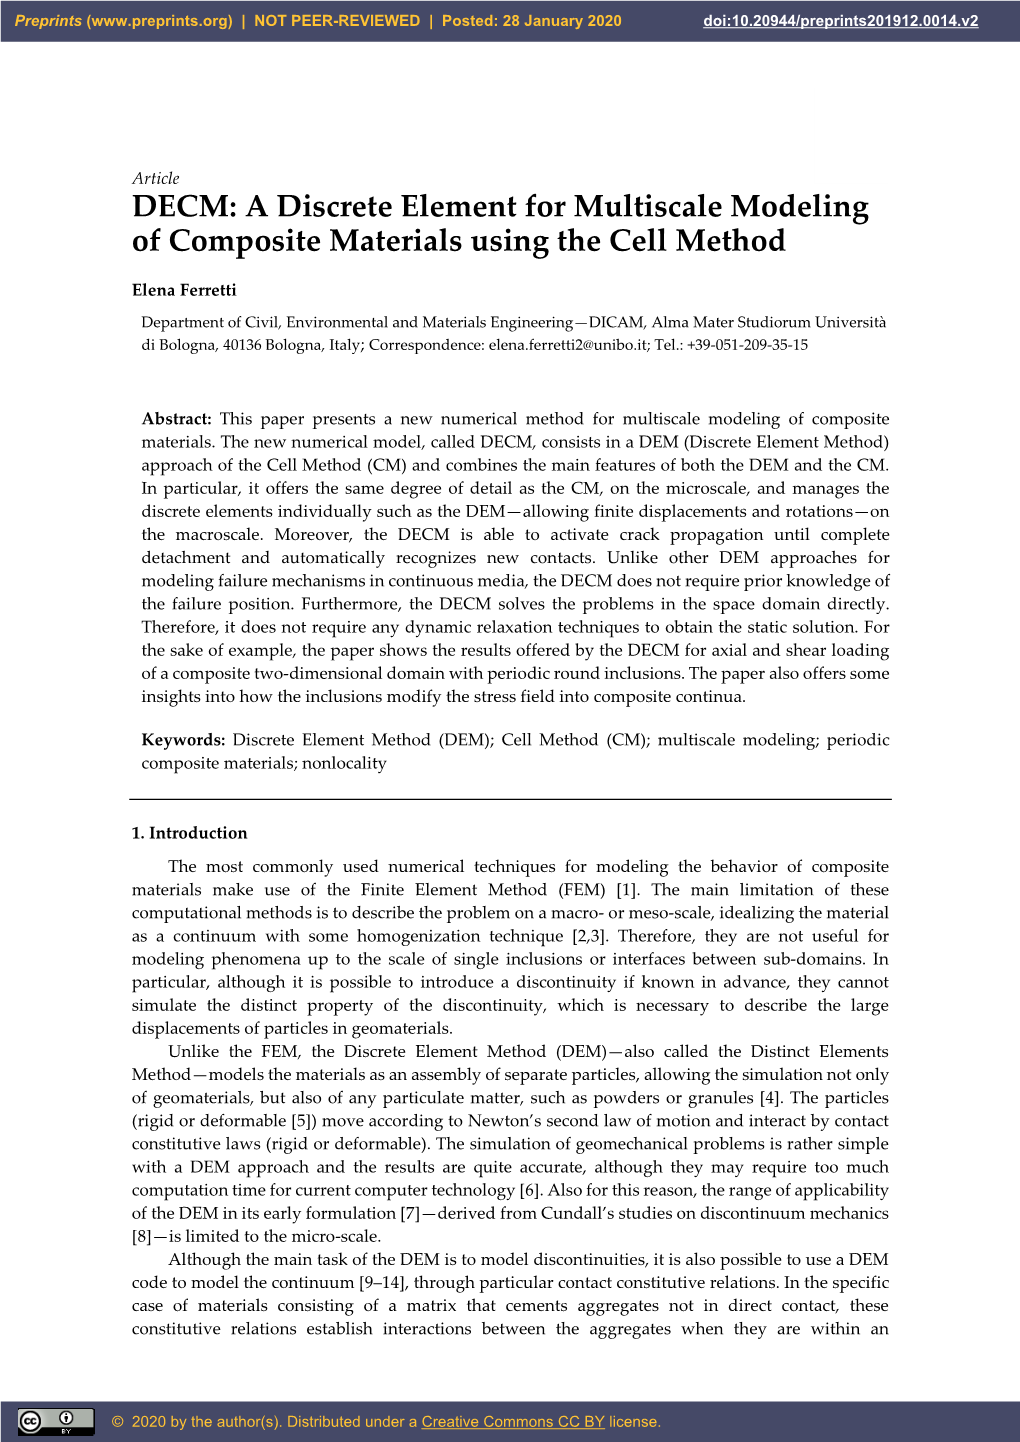 A Discrete Element for Multiscale Modeling of Composite Materials Using the Cell Method